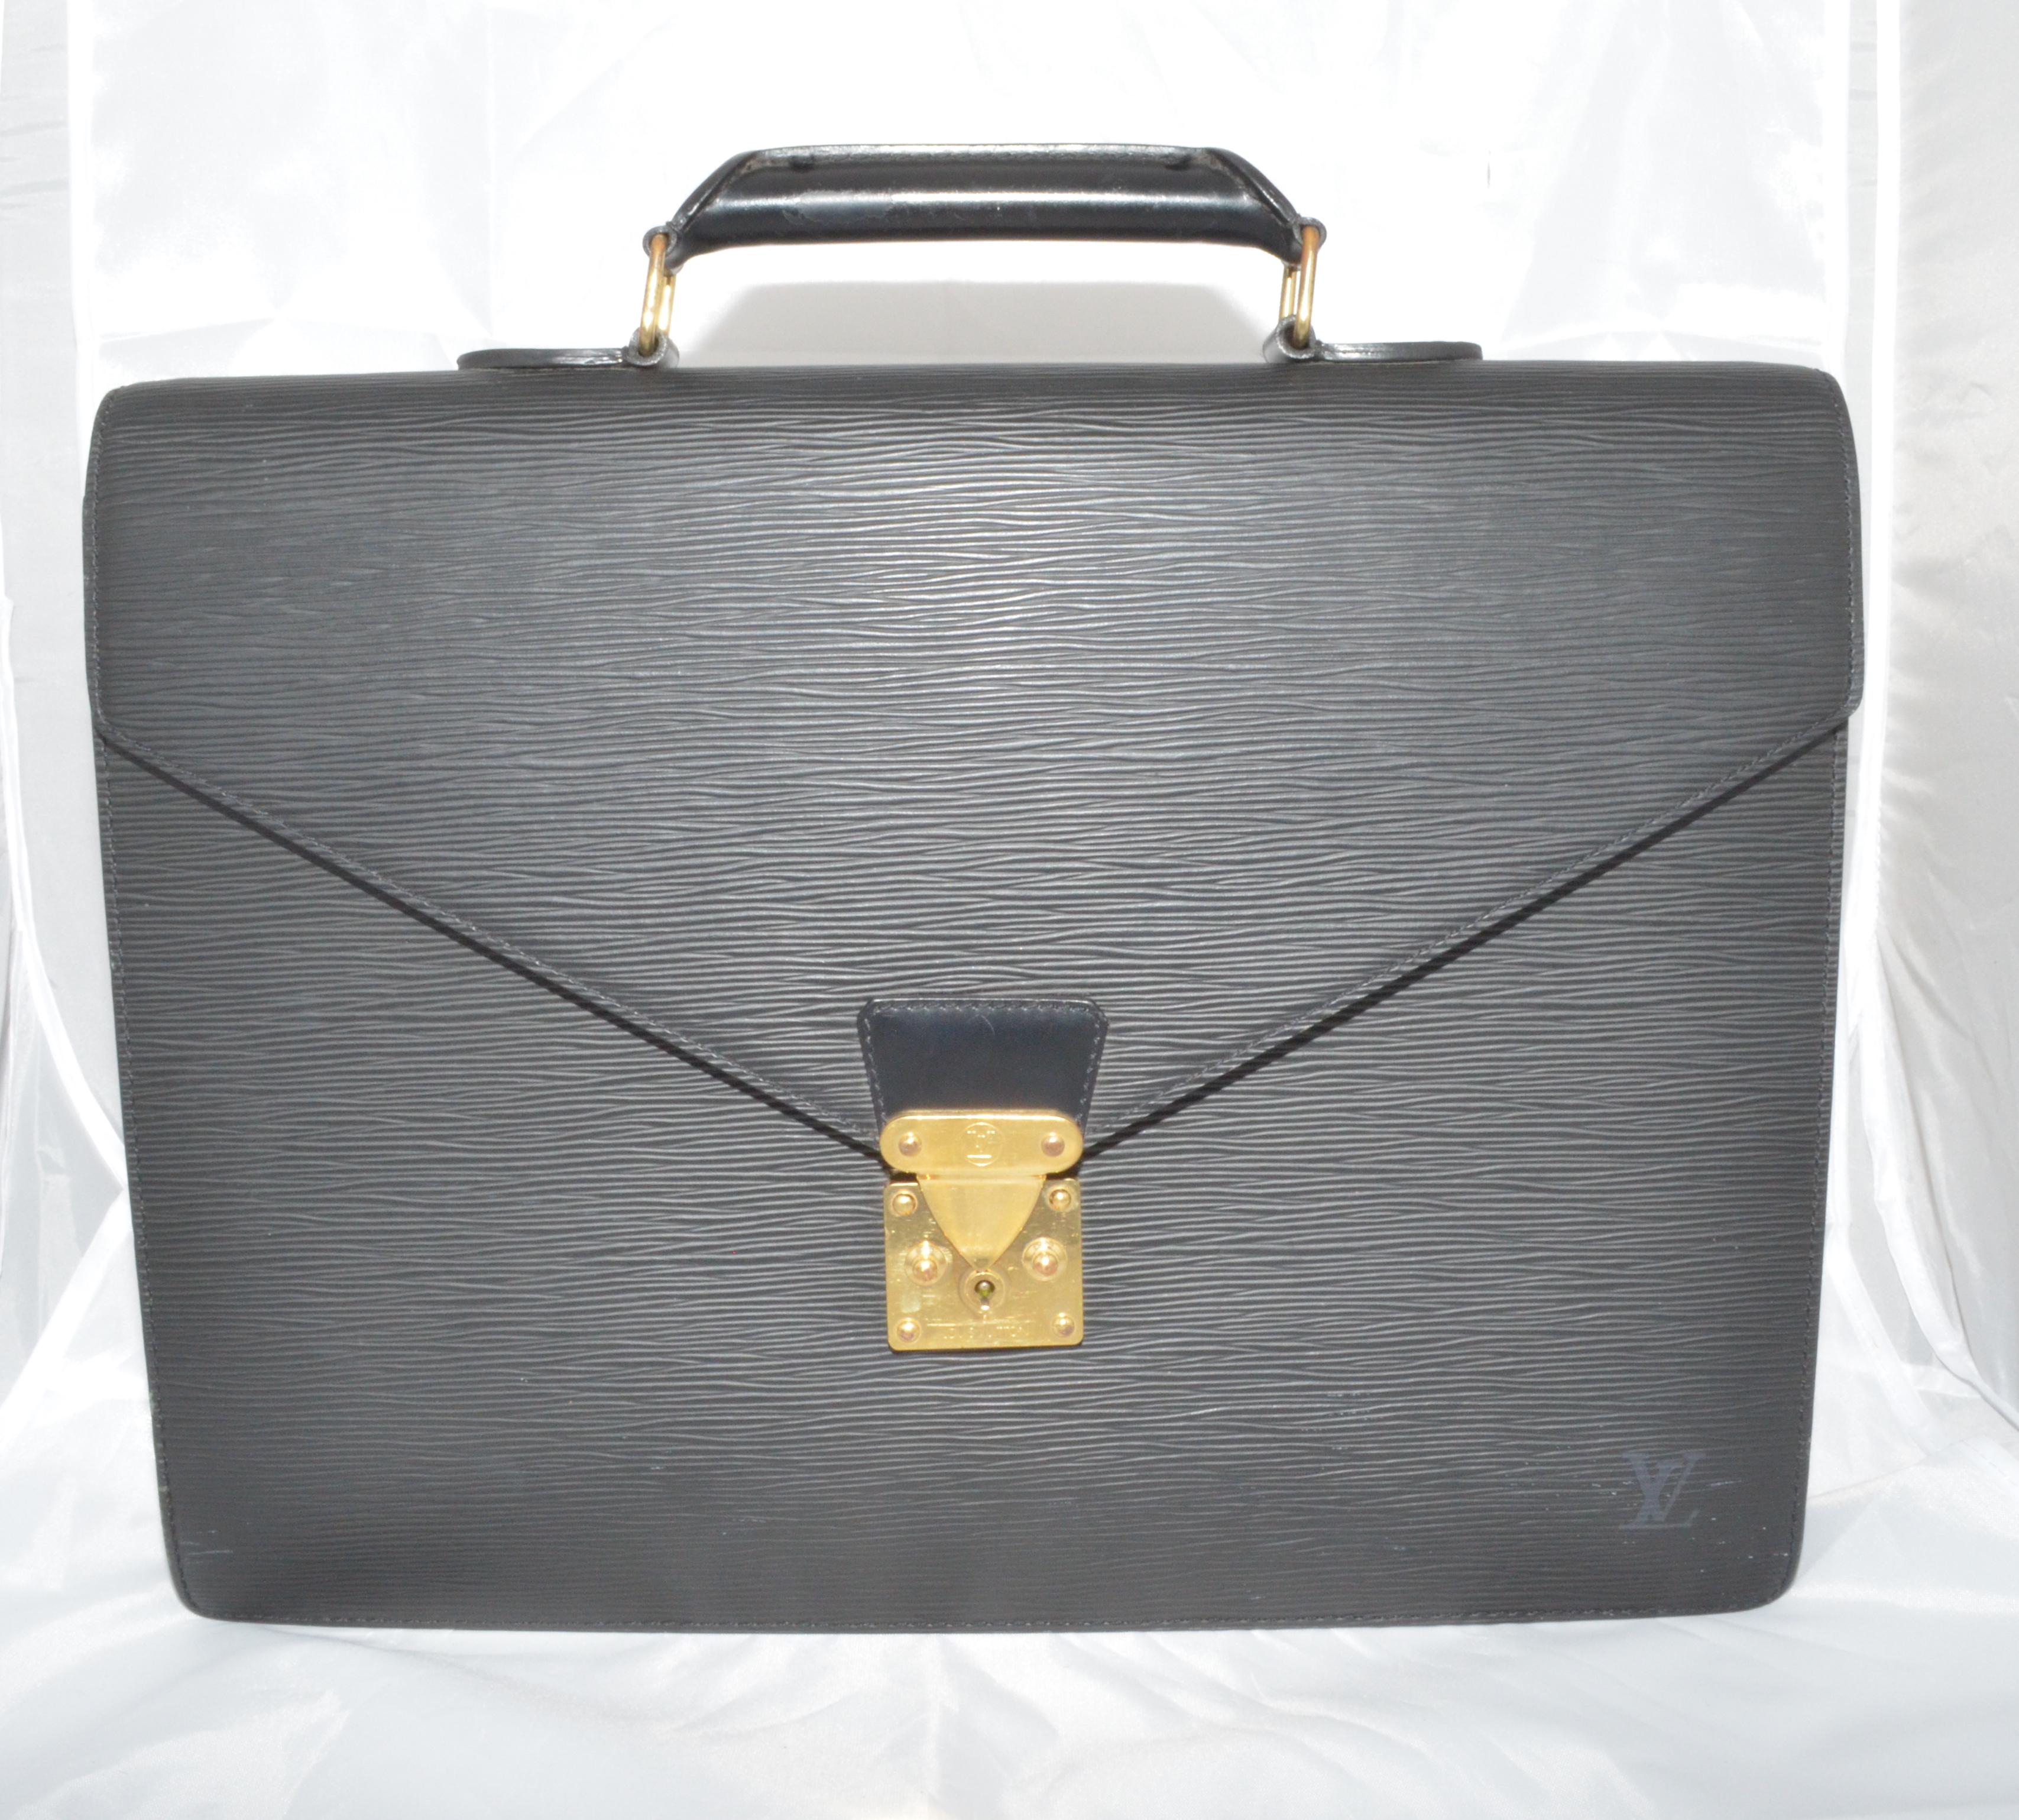 Louis Vuitton Epi leather briefcase is featured in black with gold hardware, a top handle, and an exterior back pocket. Interior is fully lined in leather and has two separated compartments with pockets. Made in France, date code: